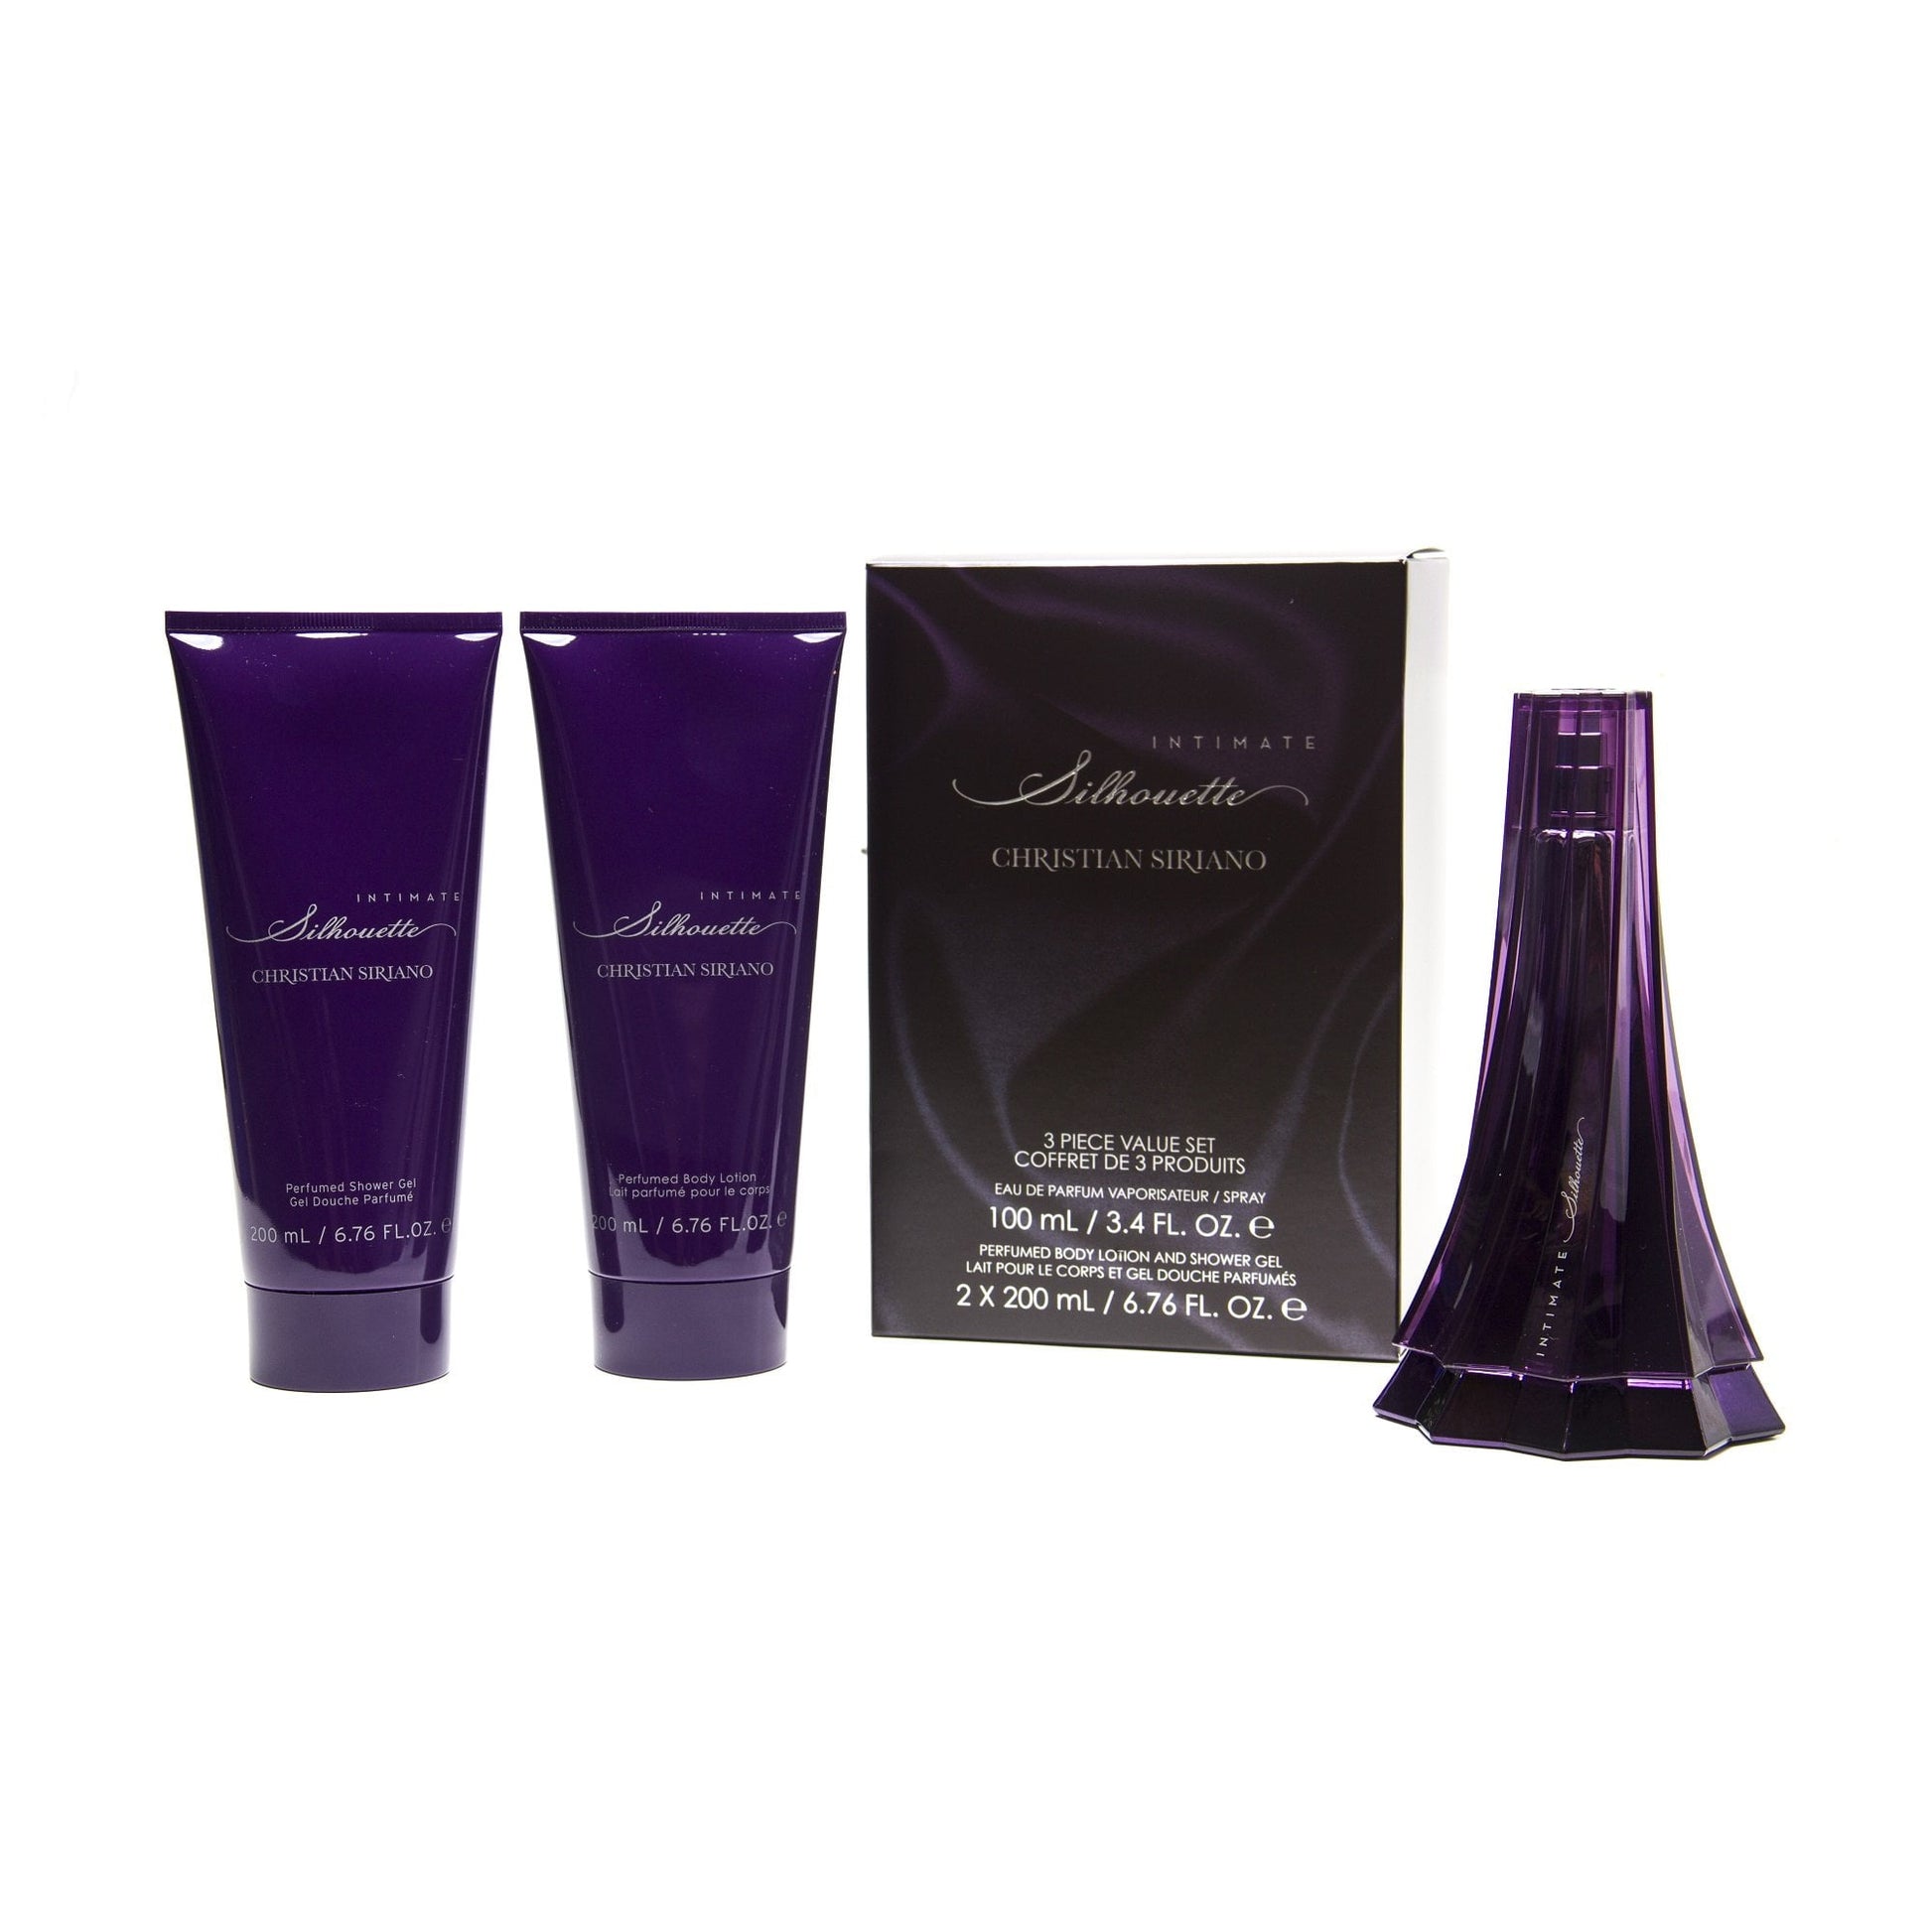 Intimate Silhouette Set for Women by Christian Siriano, Product image 1